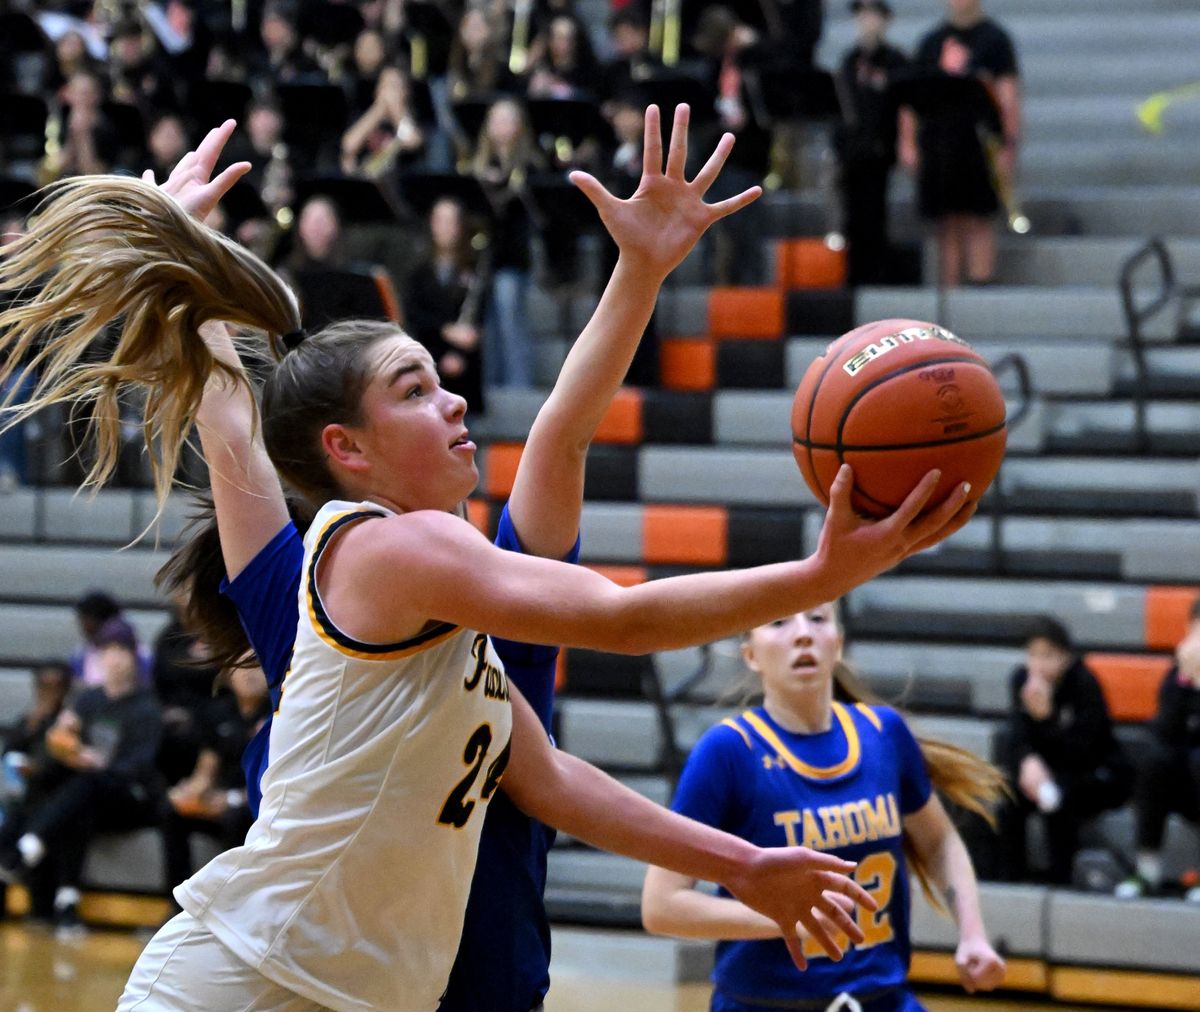 Mead guard Teryn Gardner heads to the basket against Tahoma during a Fitz Tournament girls high school basketball game held at Lewis and Clark High School on Friday.  (Colin Mulvany/The Spokesman-Review)